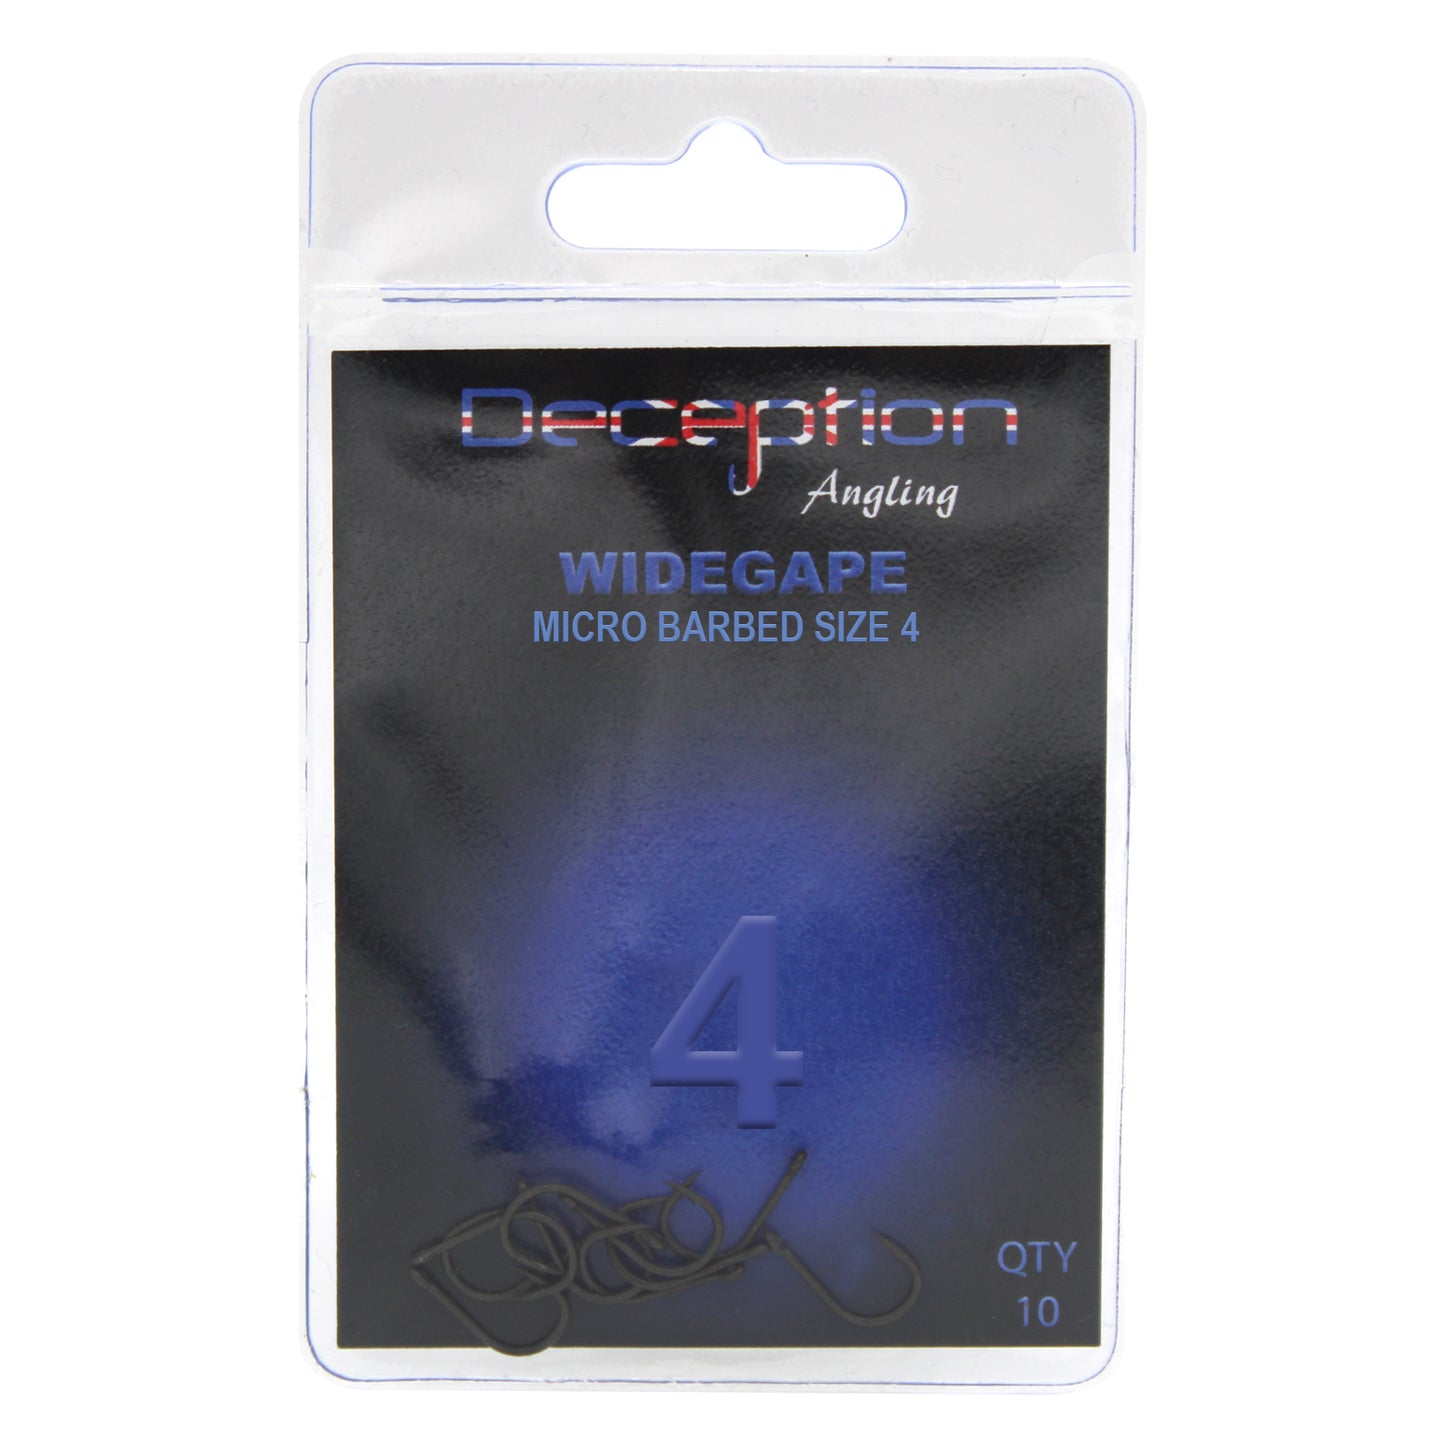 Deception Angling Wide Micro Barbed Fishing Hooks Pack of 10 Size 4